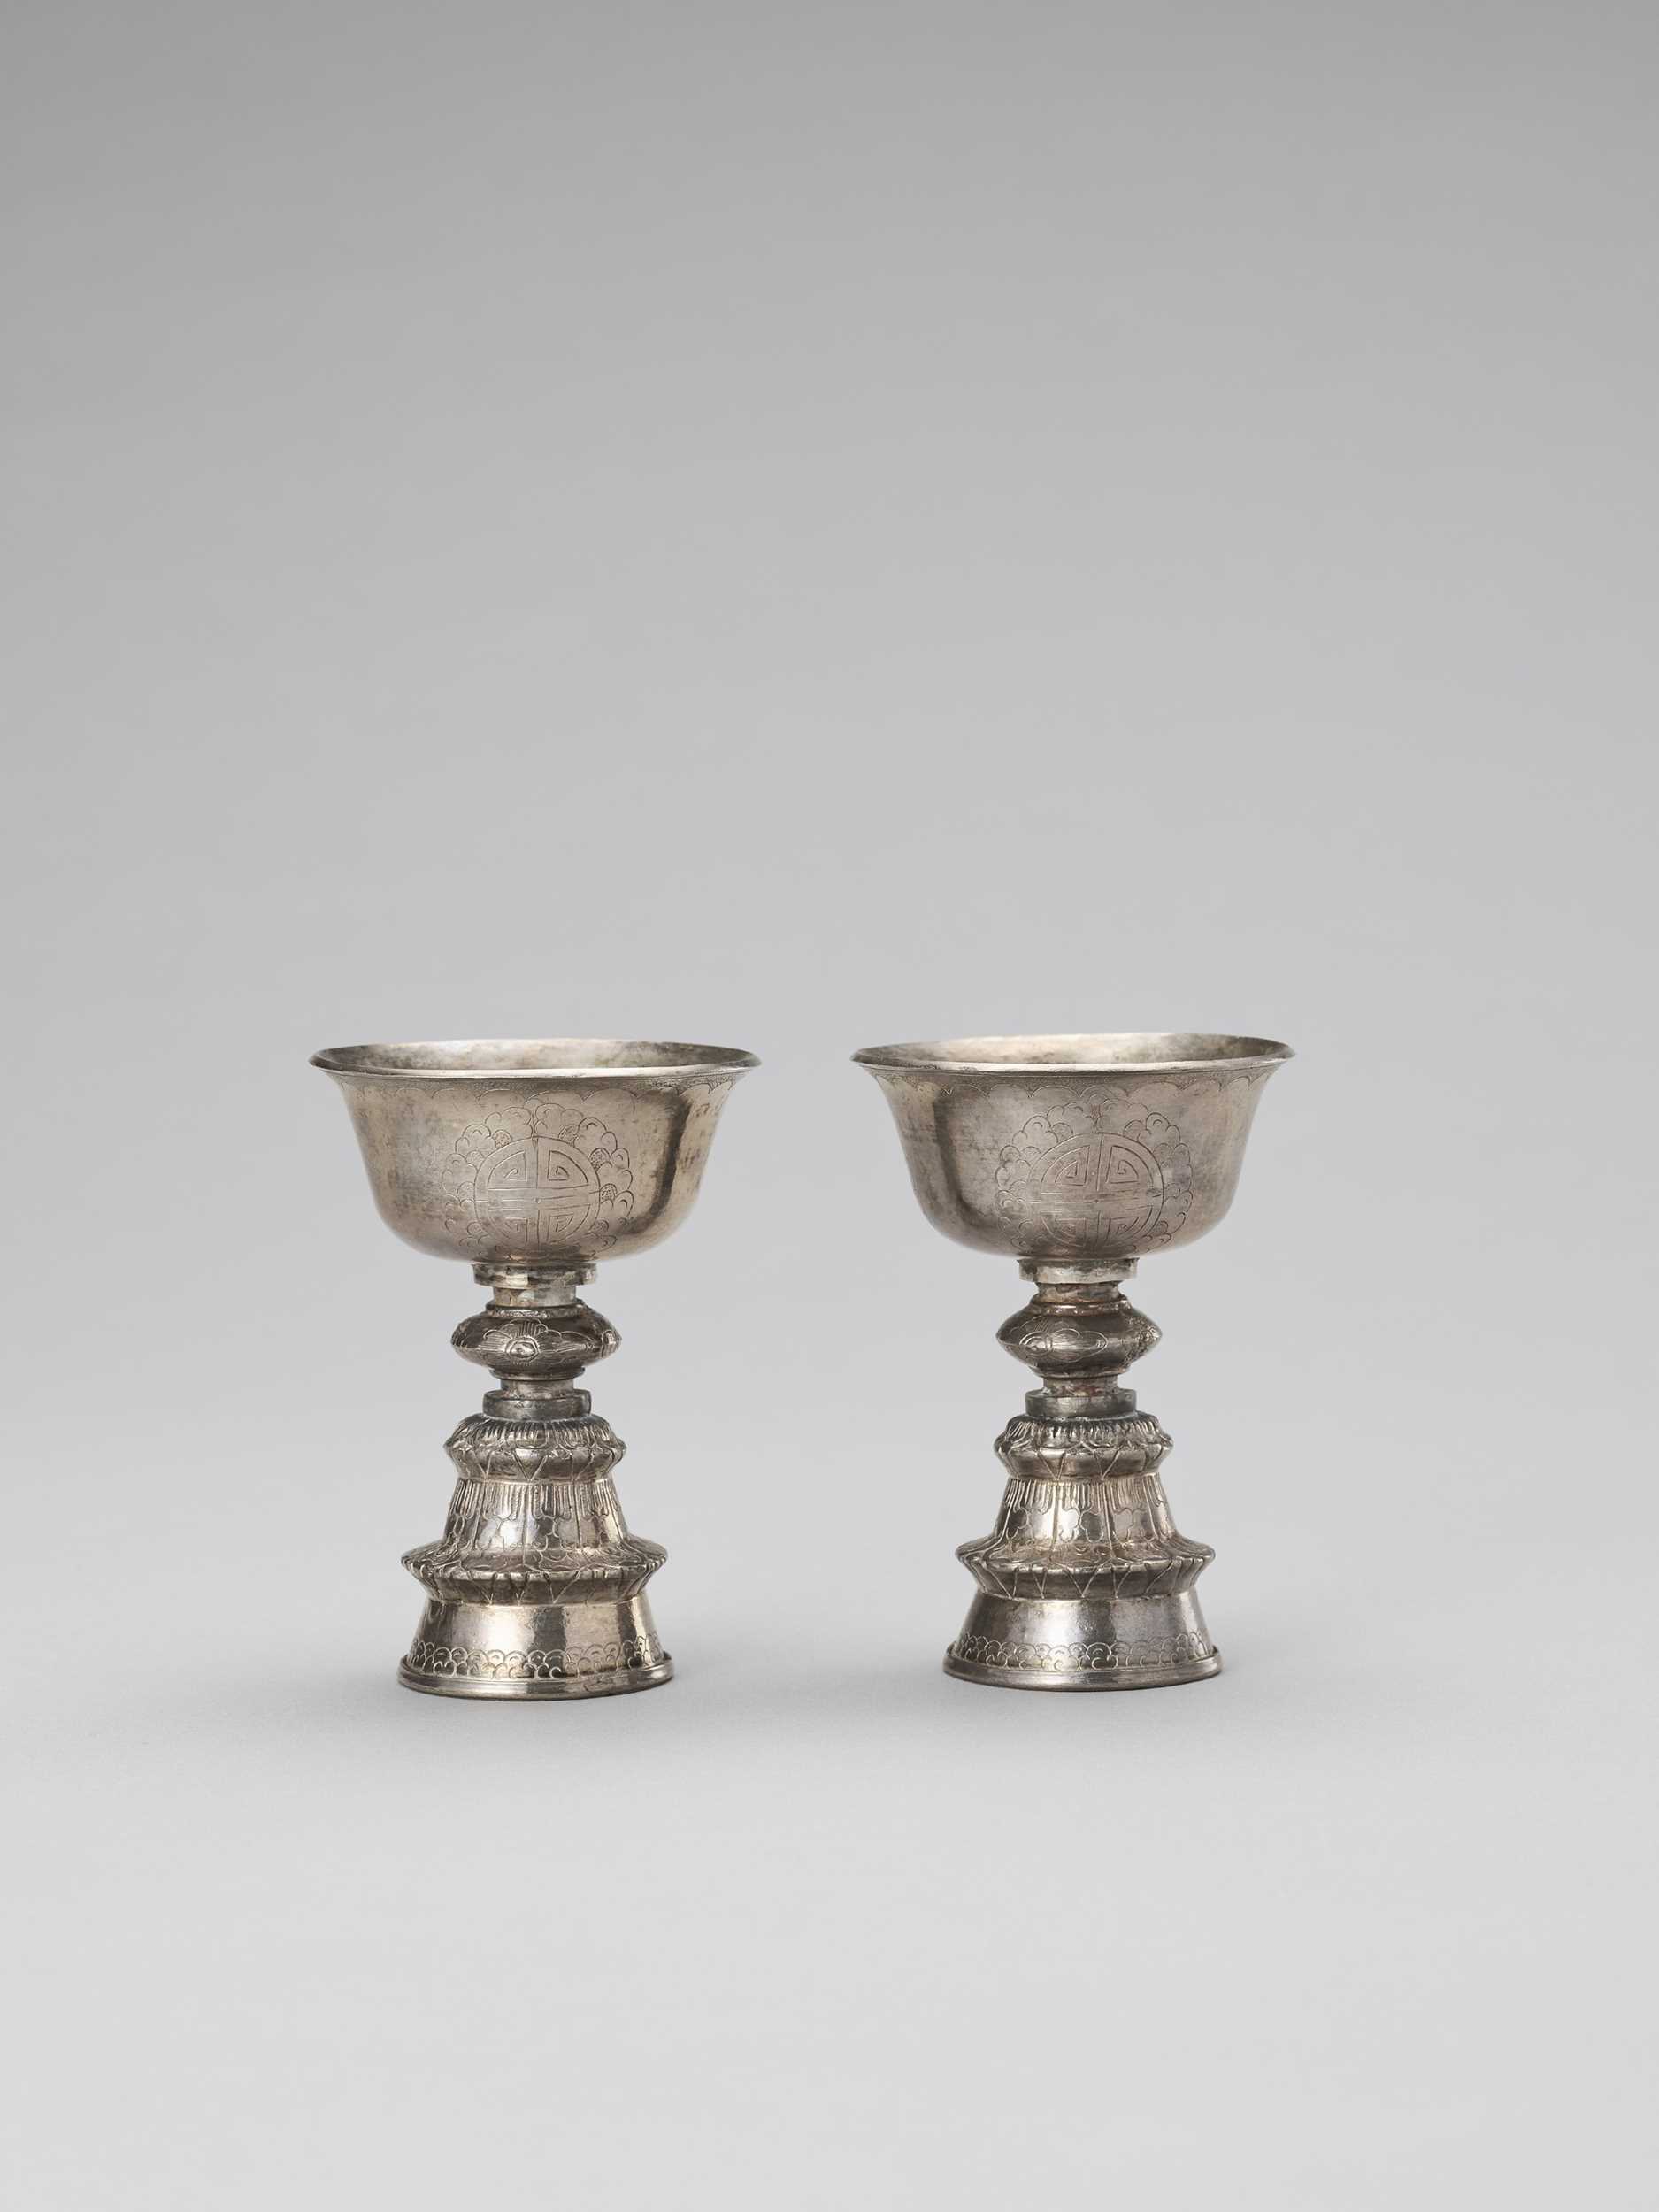 Lot 170 - A PAIR OF SINO-TIBETAN BUTTER LAMPS, LATE 19TH CENTURY